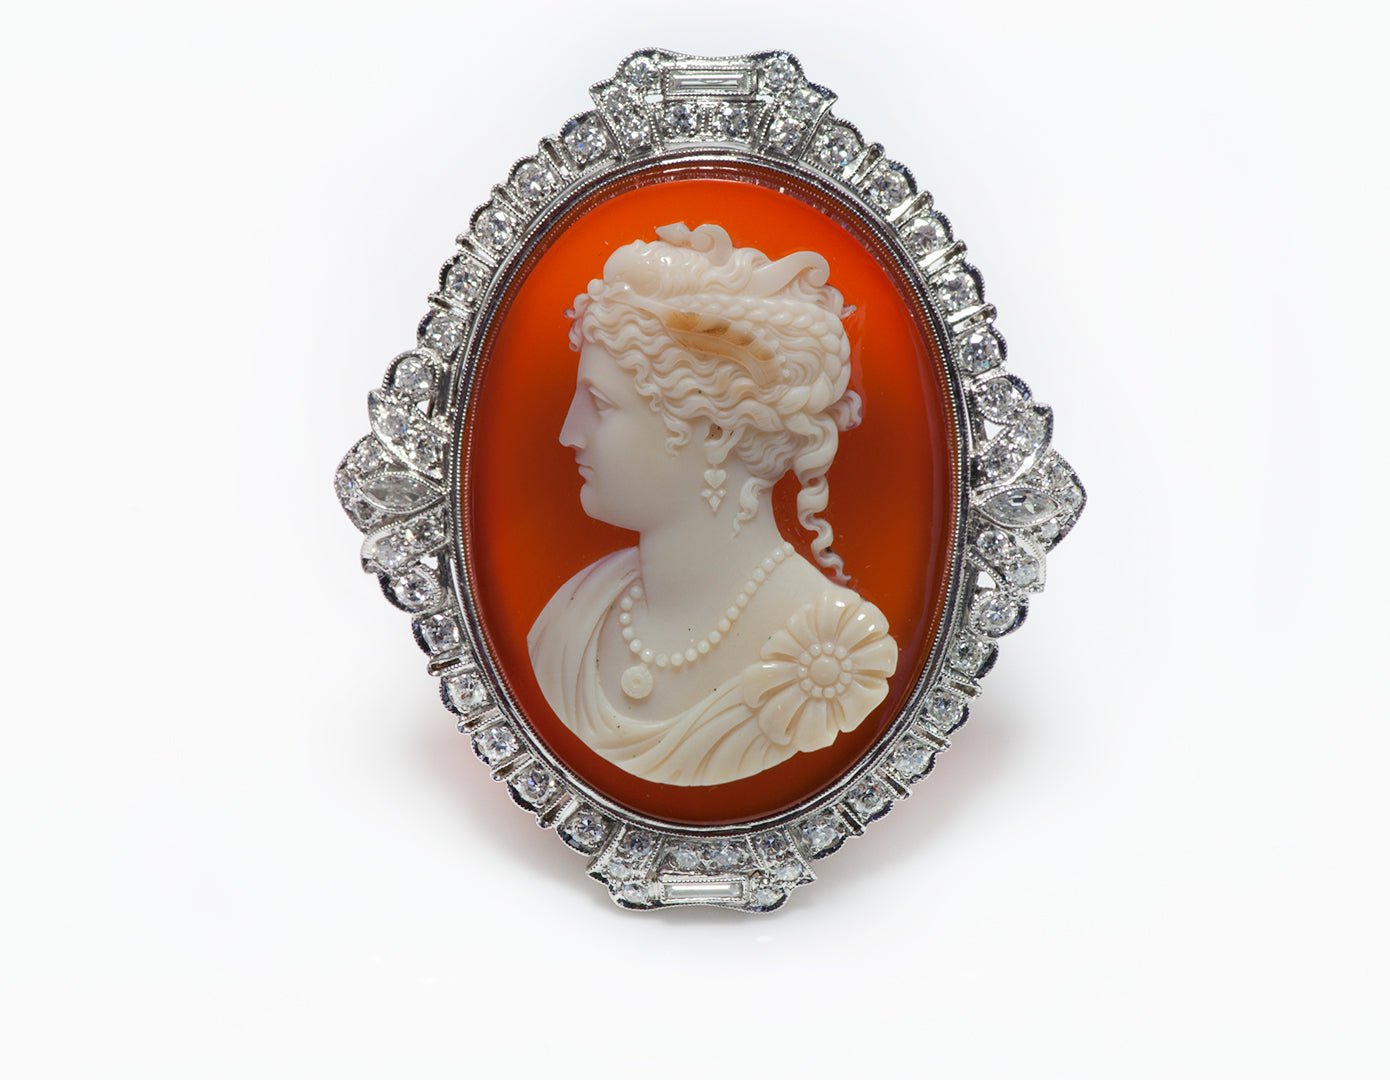 Antique Edwardian Diamond Cameo Brooch - DSF Antique Jewelry